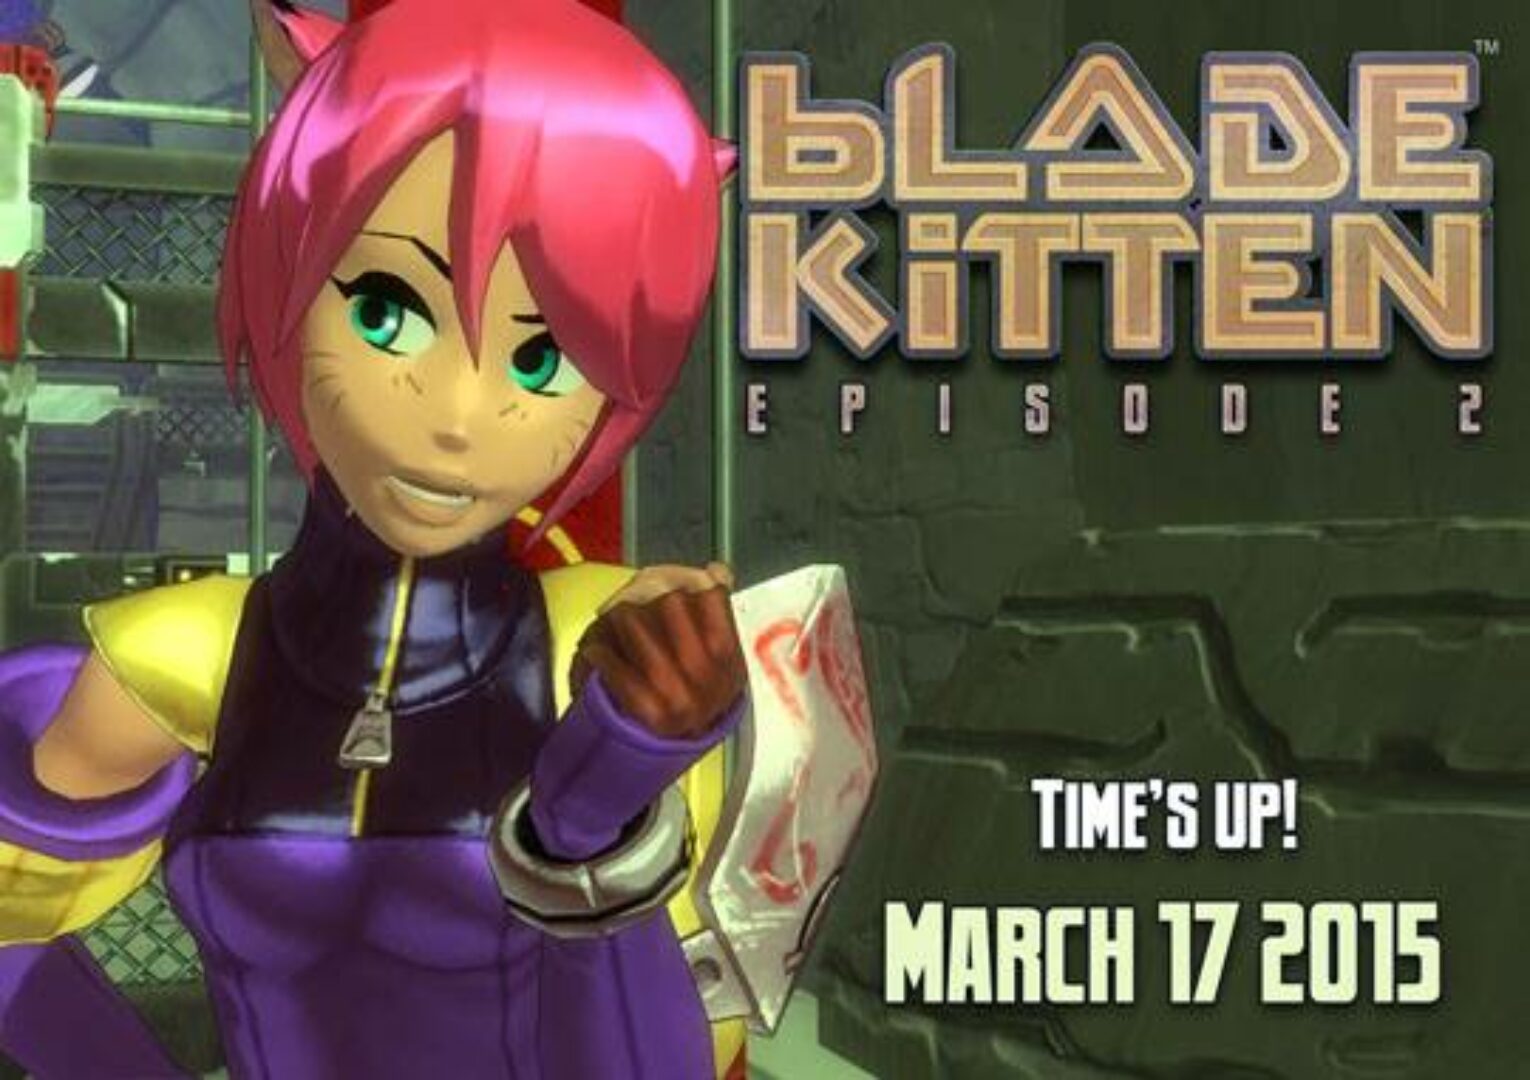 Blade Kitten Episode 2 Comes to Steam in March